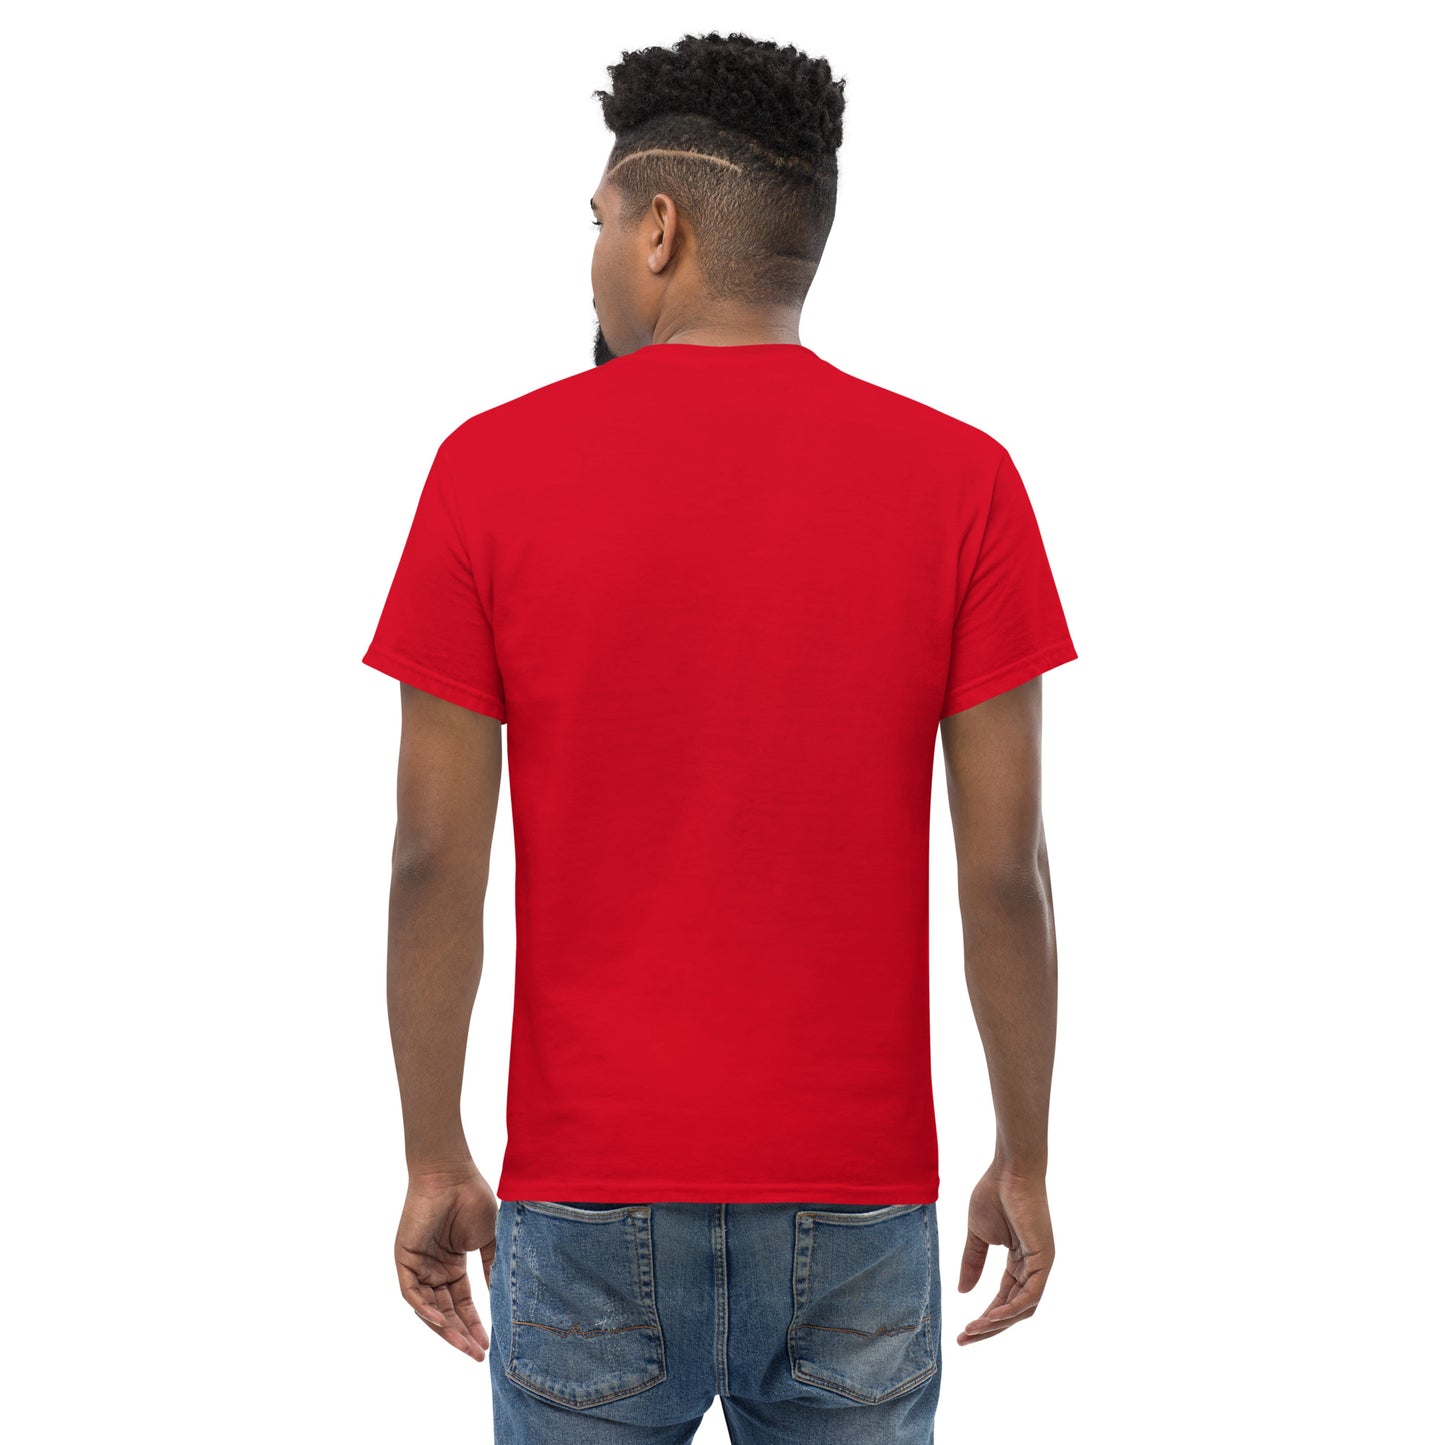 Men's classic NOT FROM THIS PLANET tee